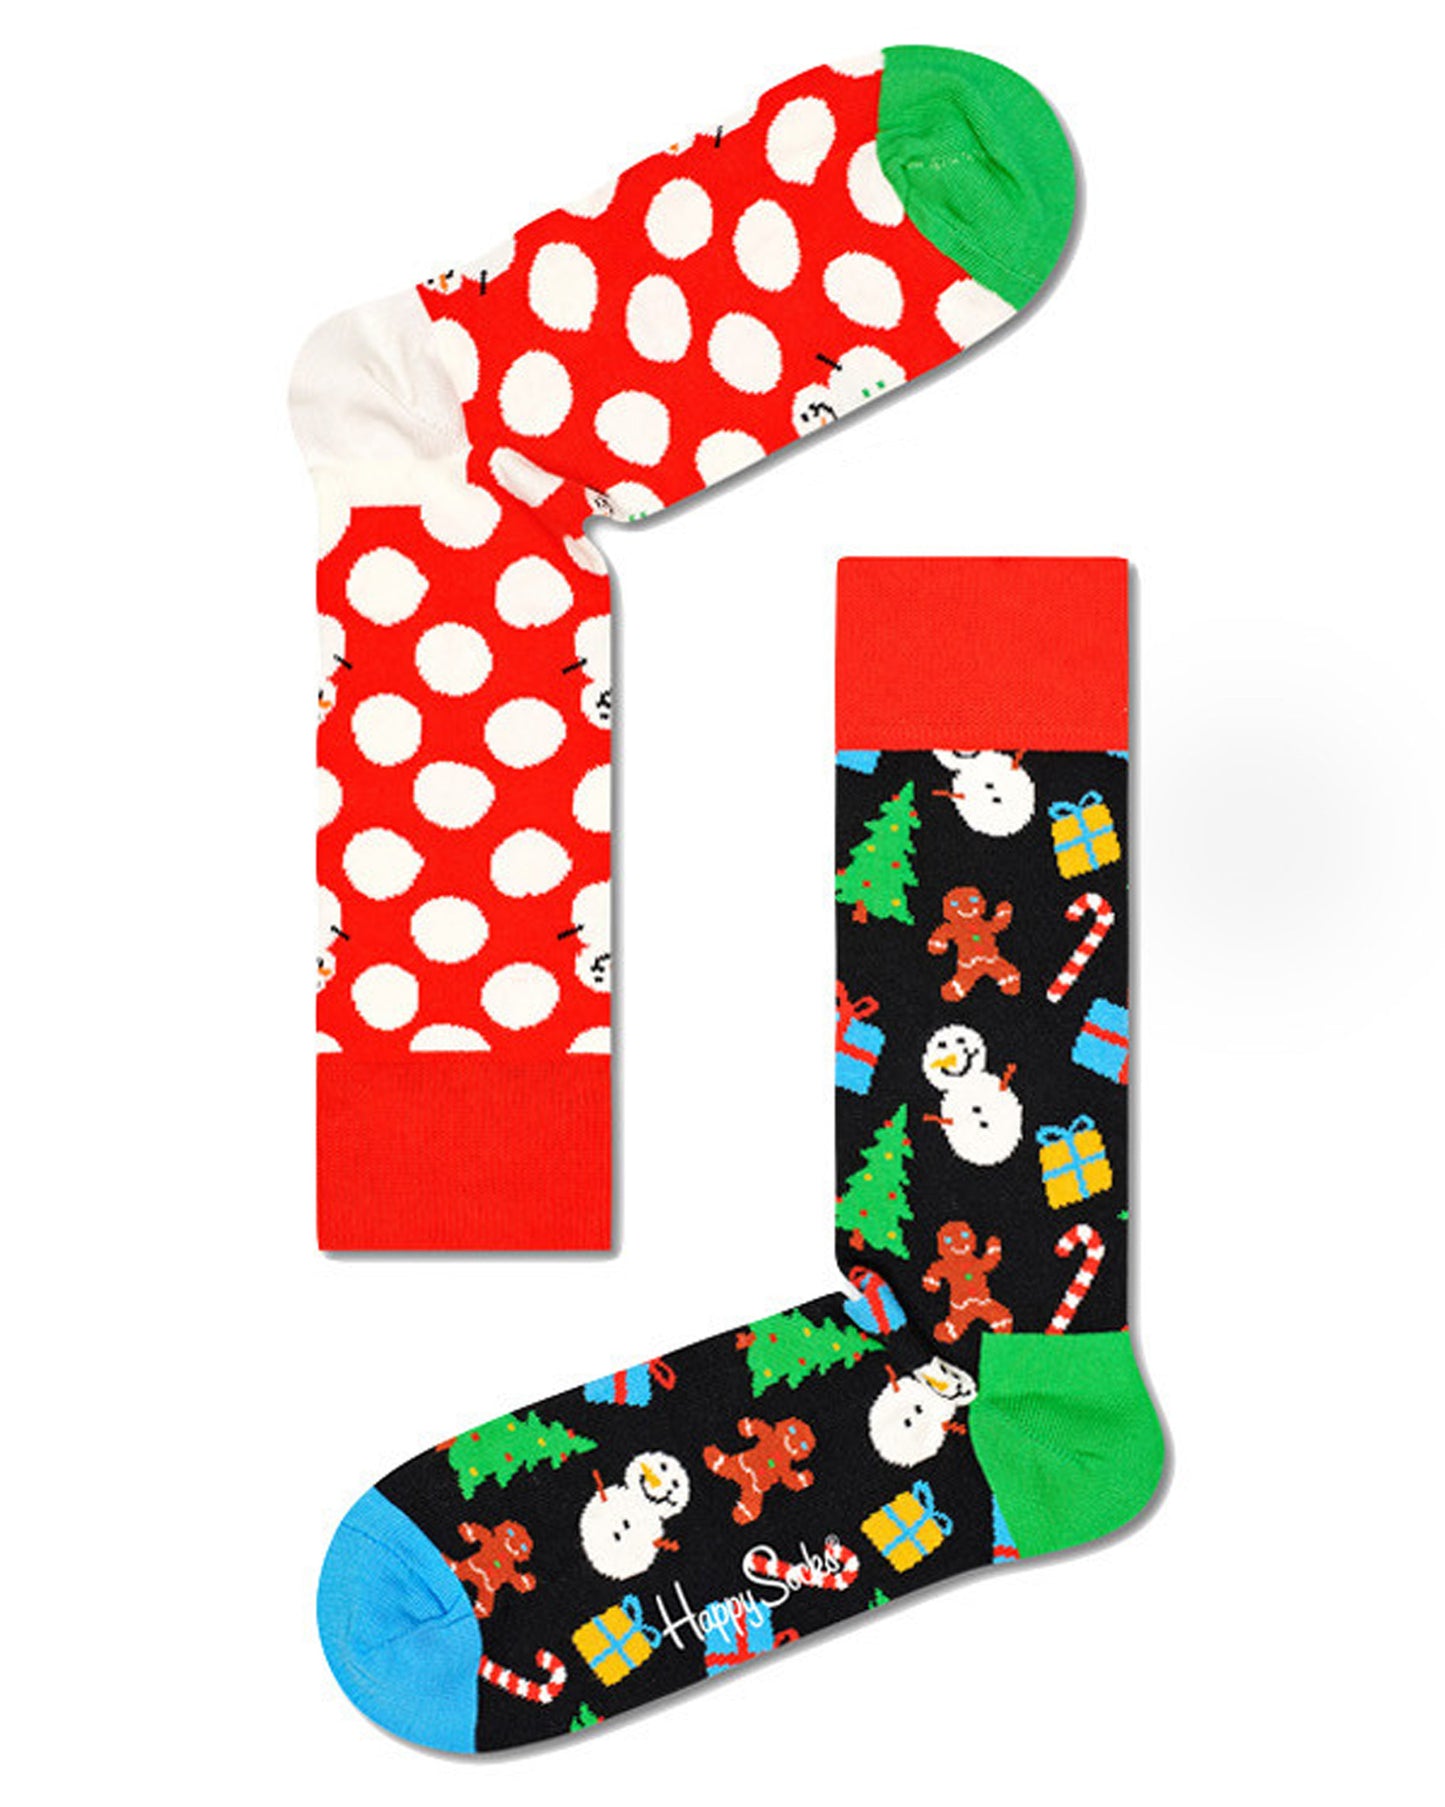 Happy Socks Big Dot Snowman Gift Box - Christmas Cracker gift box with two pairs of socks. One pair is red with white snowman and polka dots pattern and the other has a pattern of ginger bread men, candy canes, snowmen, presents, Xmas trees on a black background with light blue toe, green heel and red cuff.